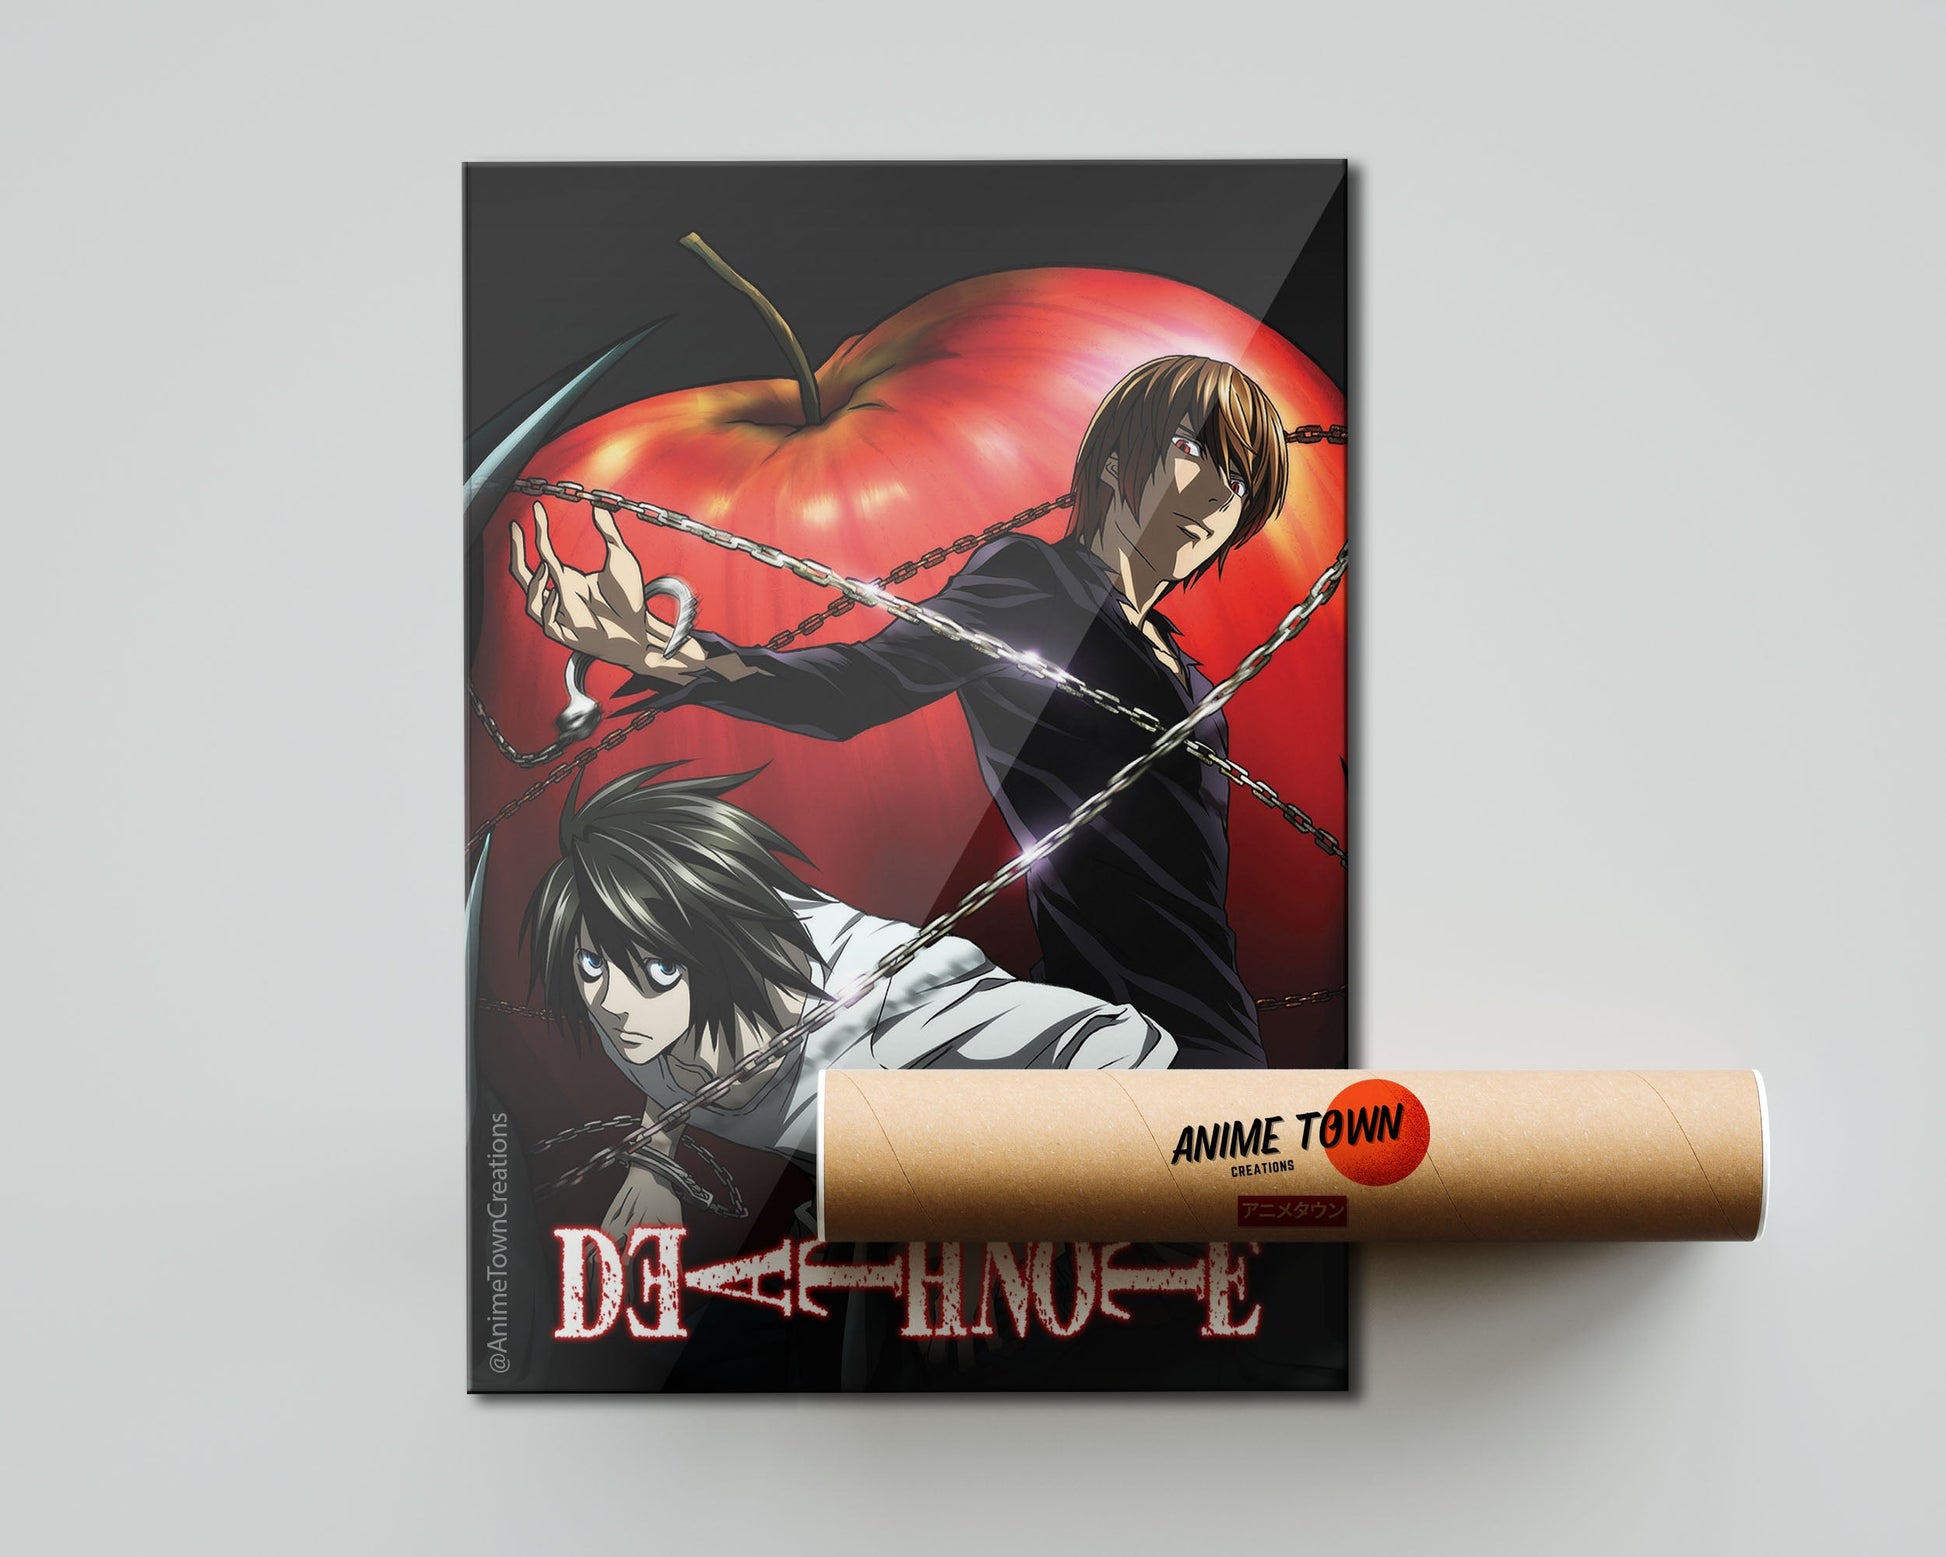 Anime Town Creations Poster Death Note 5" x 7" Home Goods - Anime Death Note Poster